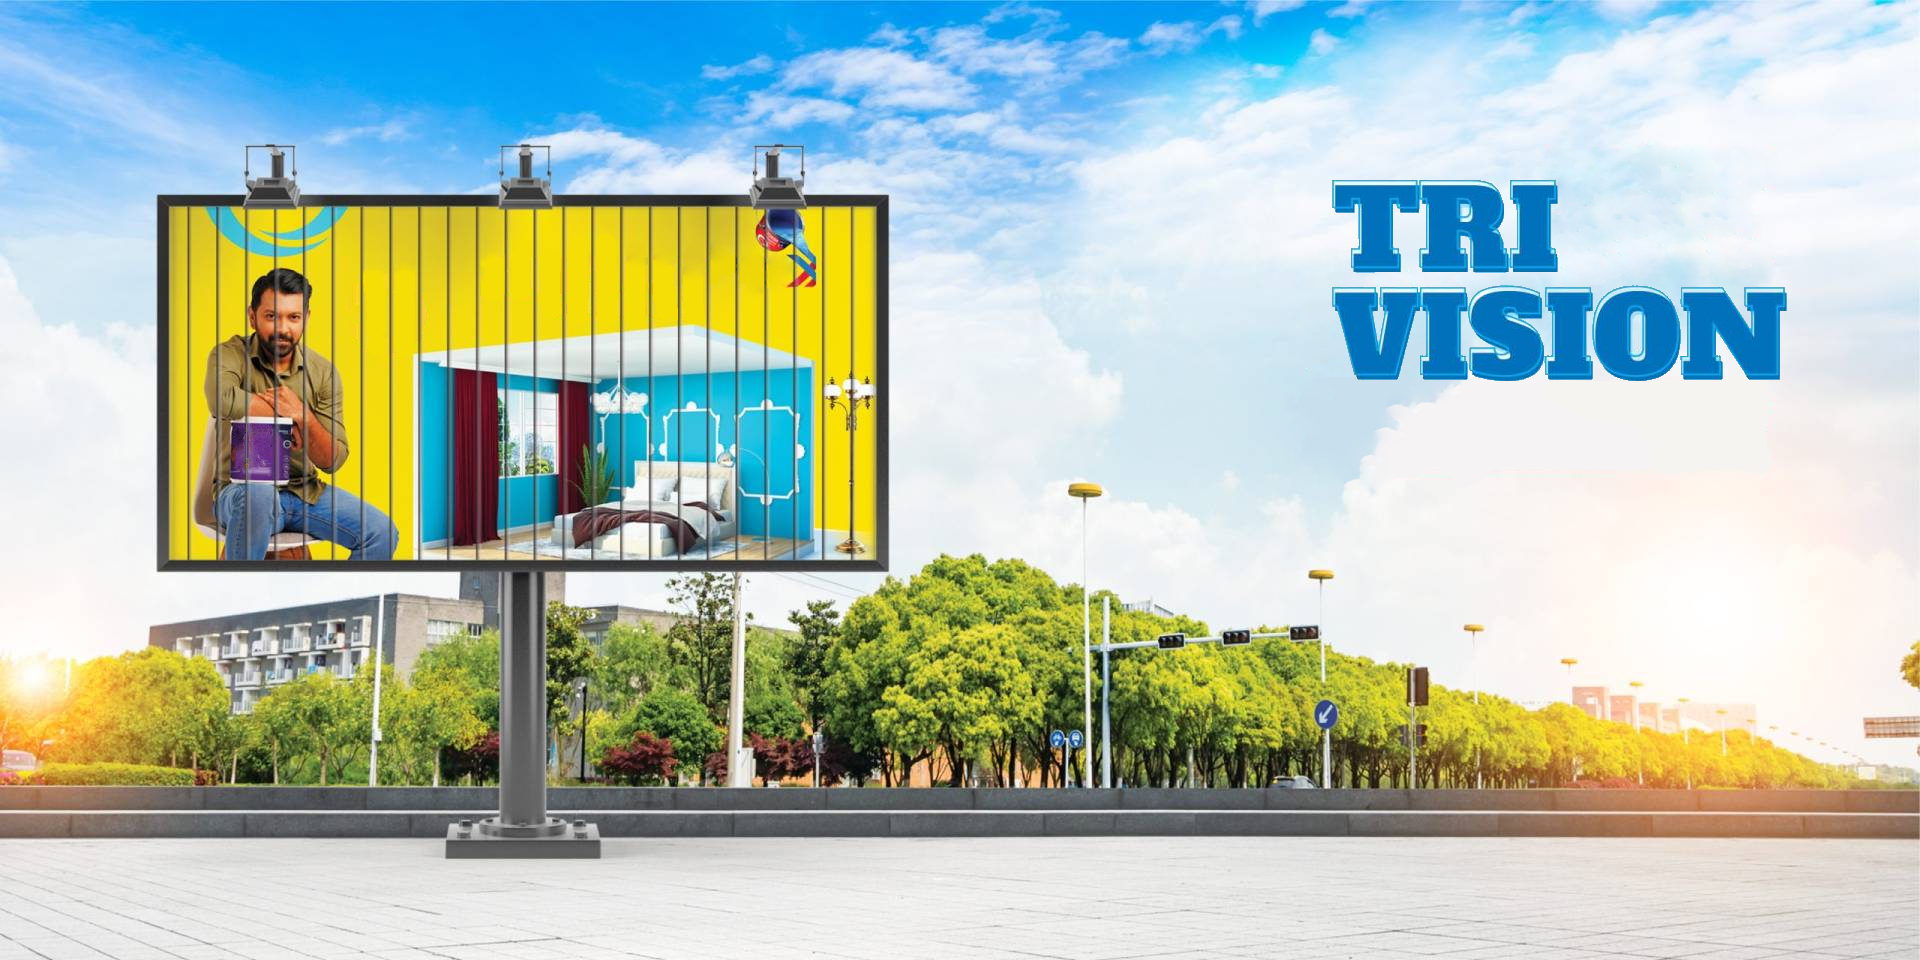 What are trivision billboards and why are they so popular